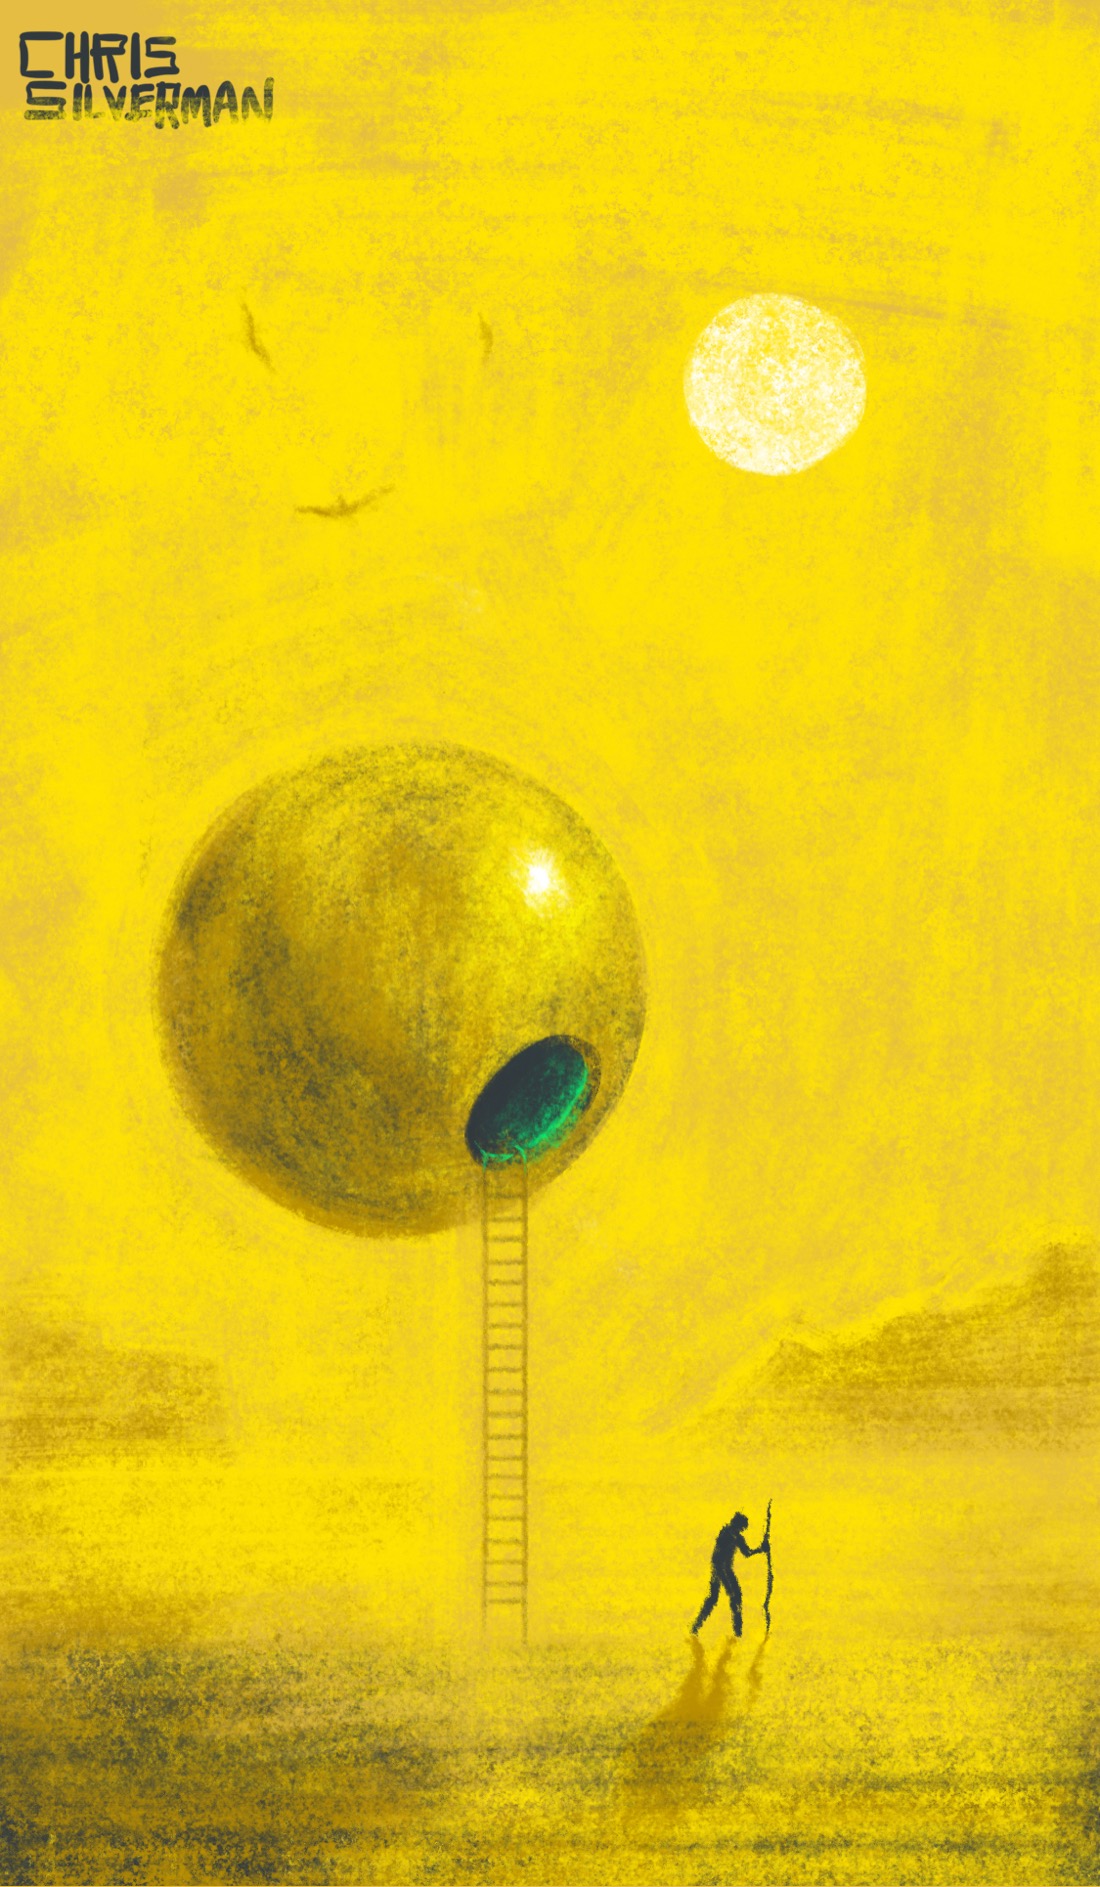 A hazy, yellow desert, with low mountains in the background. The sun sits high in the sky, as buzzards wheel above. Hovering about 30 feet above the desert floor is a house-sized metal sphere the color of the desert. There is only one opening in it: a circular hatchway, revealing a greenish glow from the interior. A ladder drops from the hatchway to the ground. Walking away from the ladder is a small figure carrying a staff.